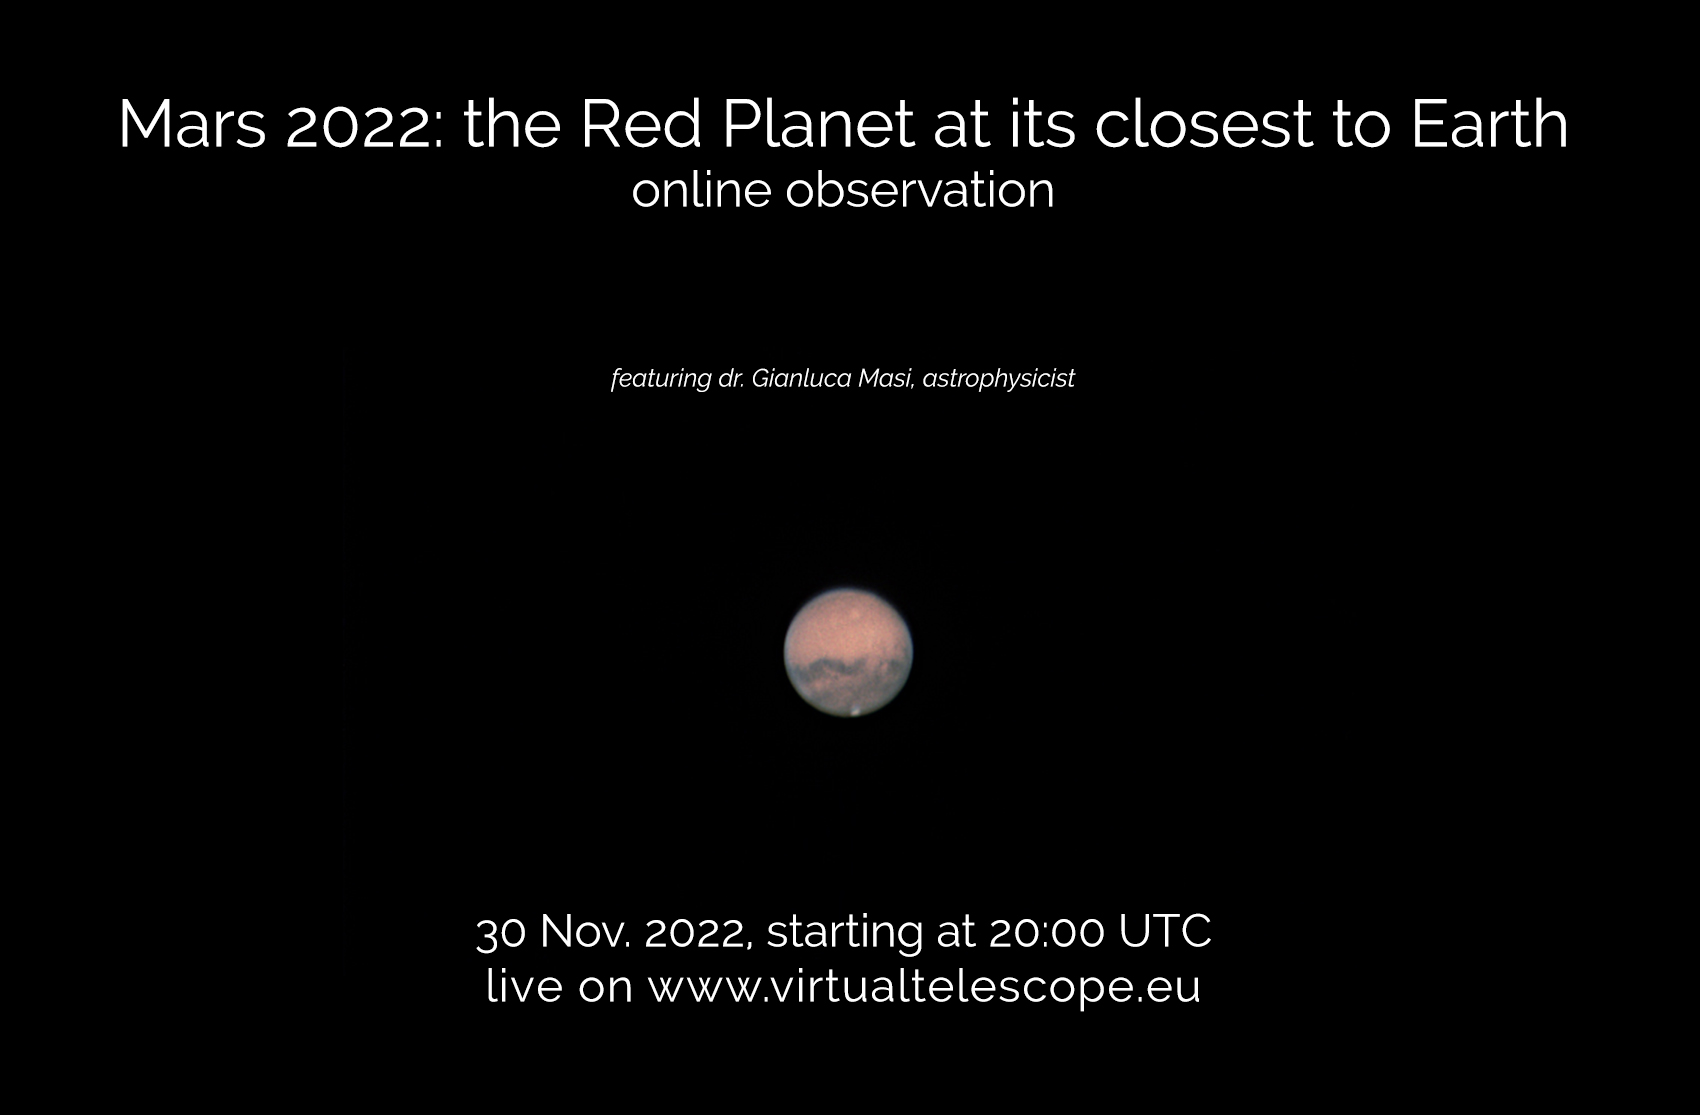 Mars 2022 at its closest to the Earth: poster of the event.